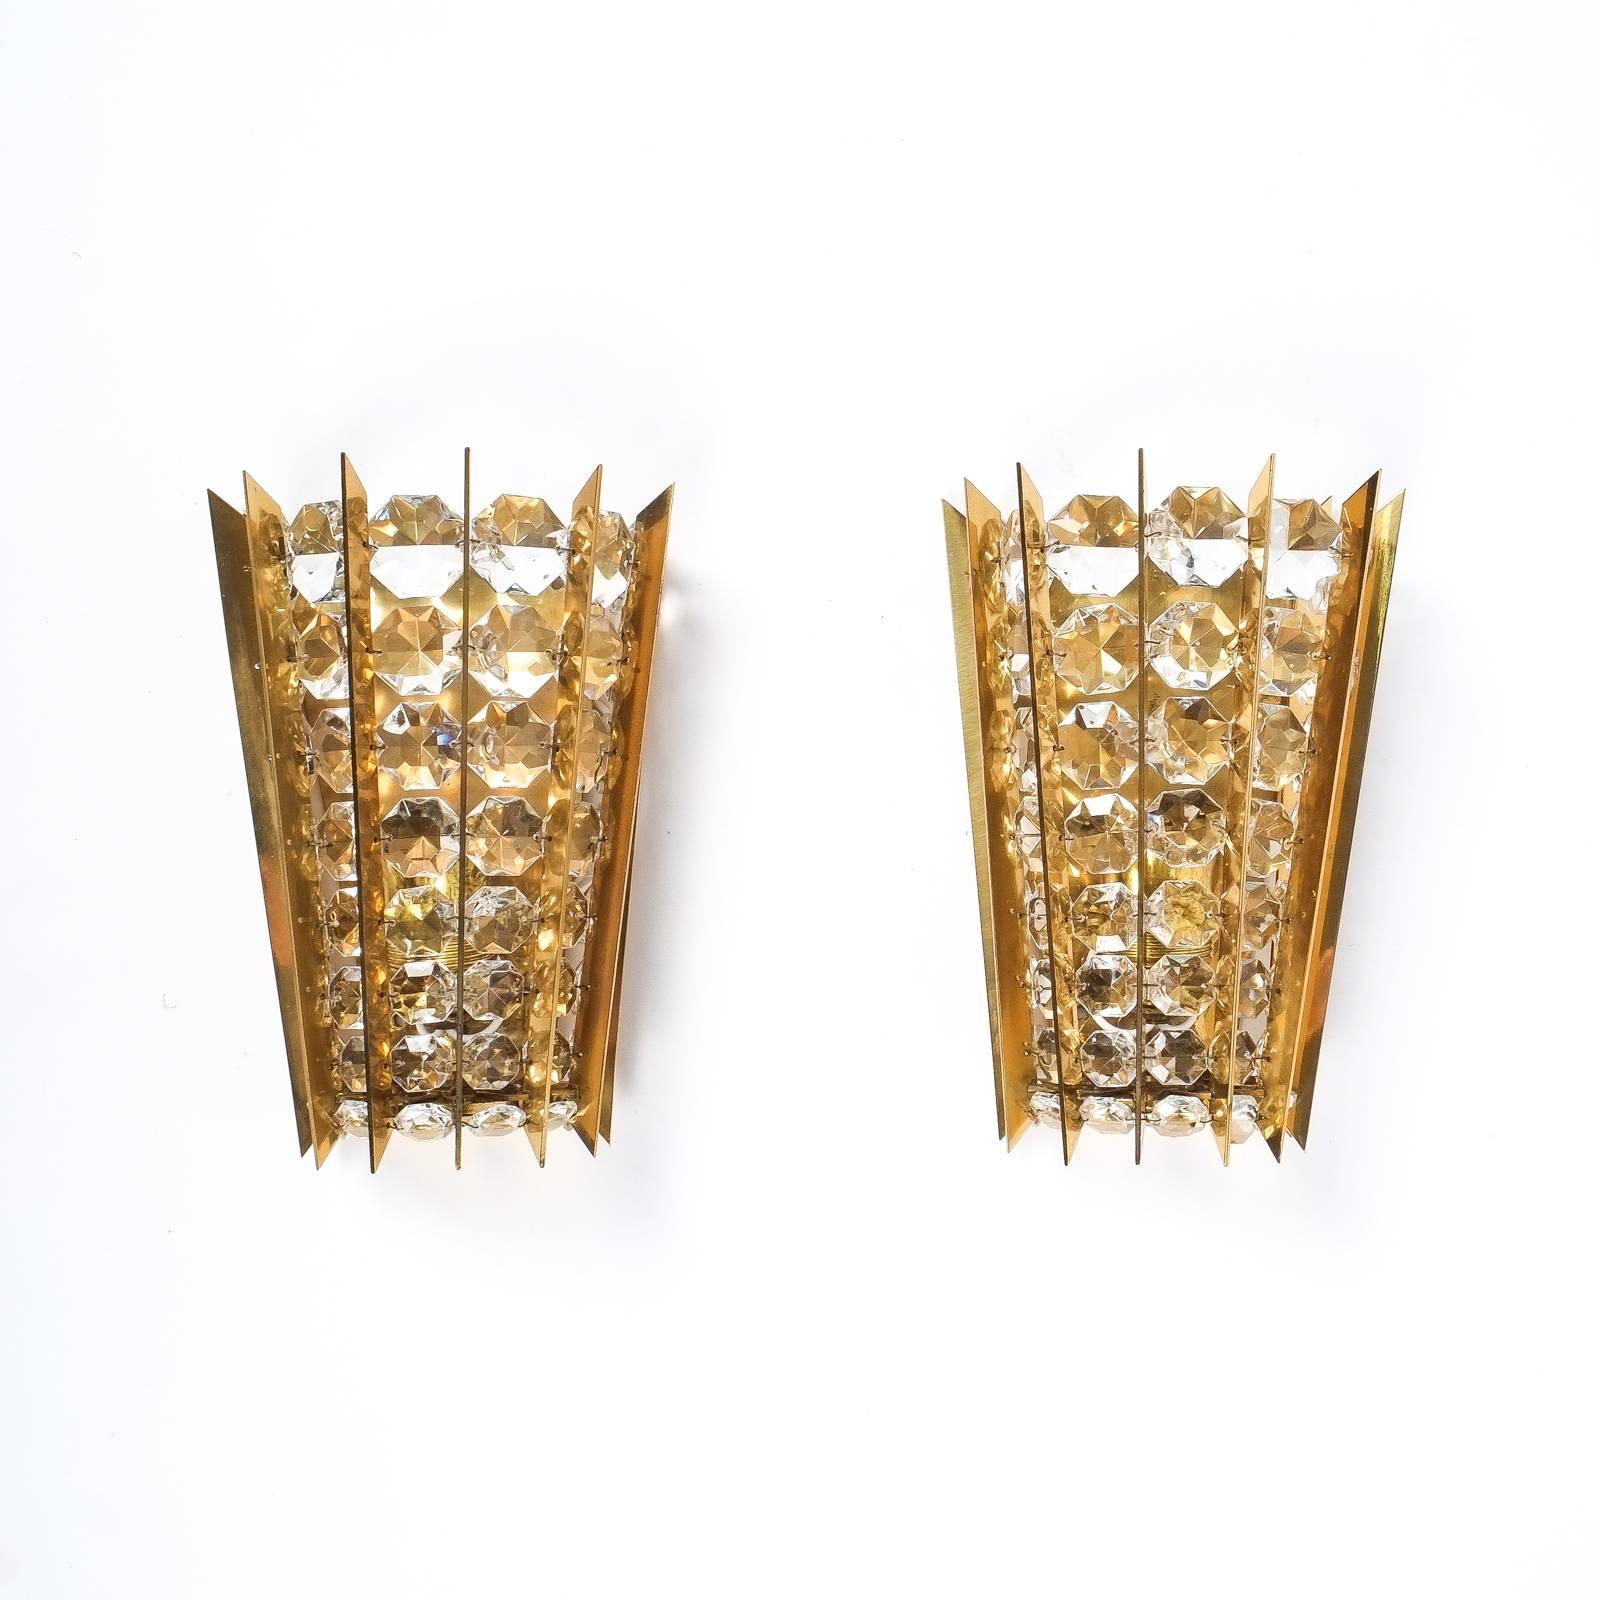 Mid-20th Century Bakalowits & Sohne Crystal and Brass Gold Glass Sconces, Austria, circa 1955 For Sale